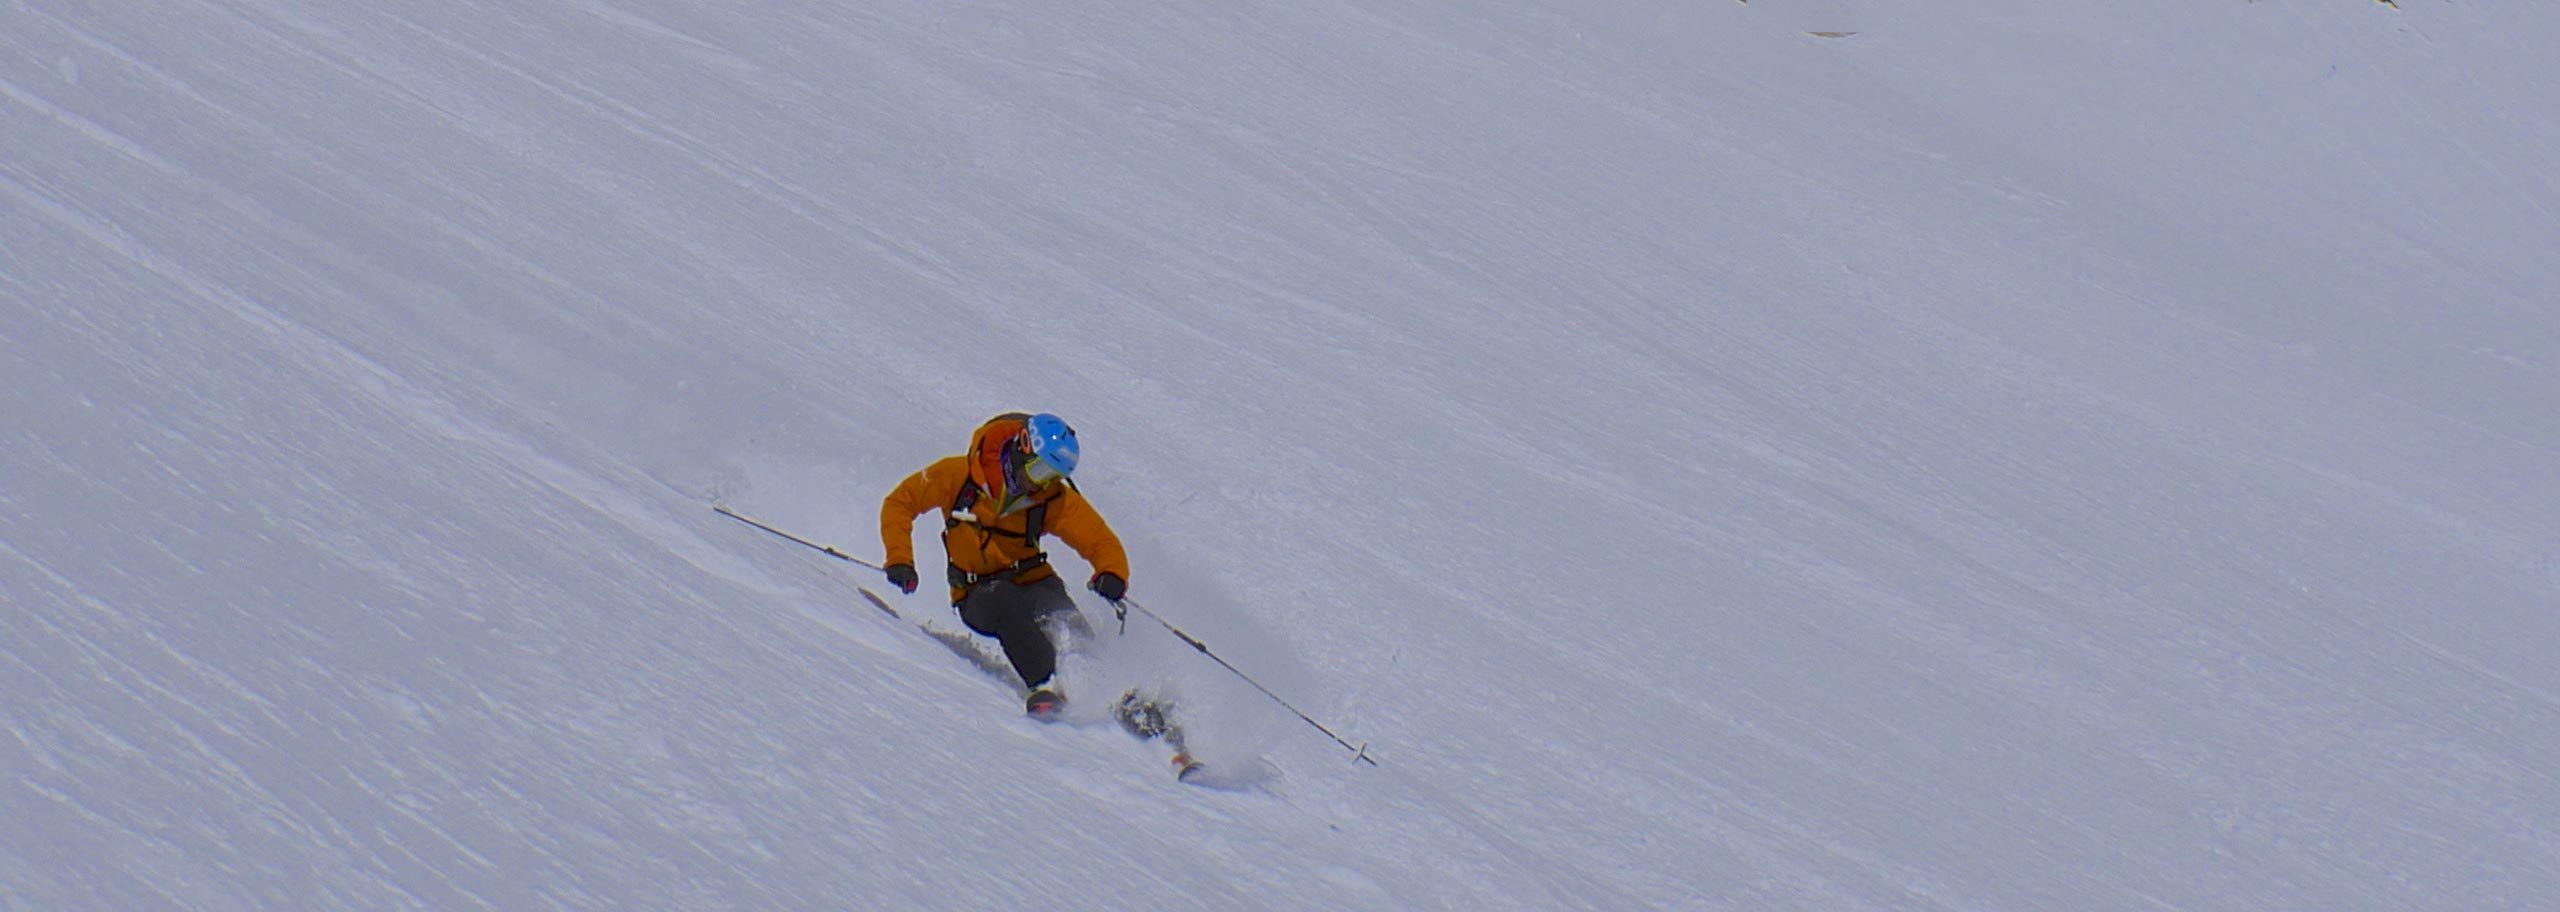 Off-piste Skiing in Claviere, Freeride with a Mountain Guide